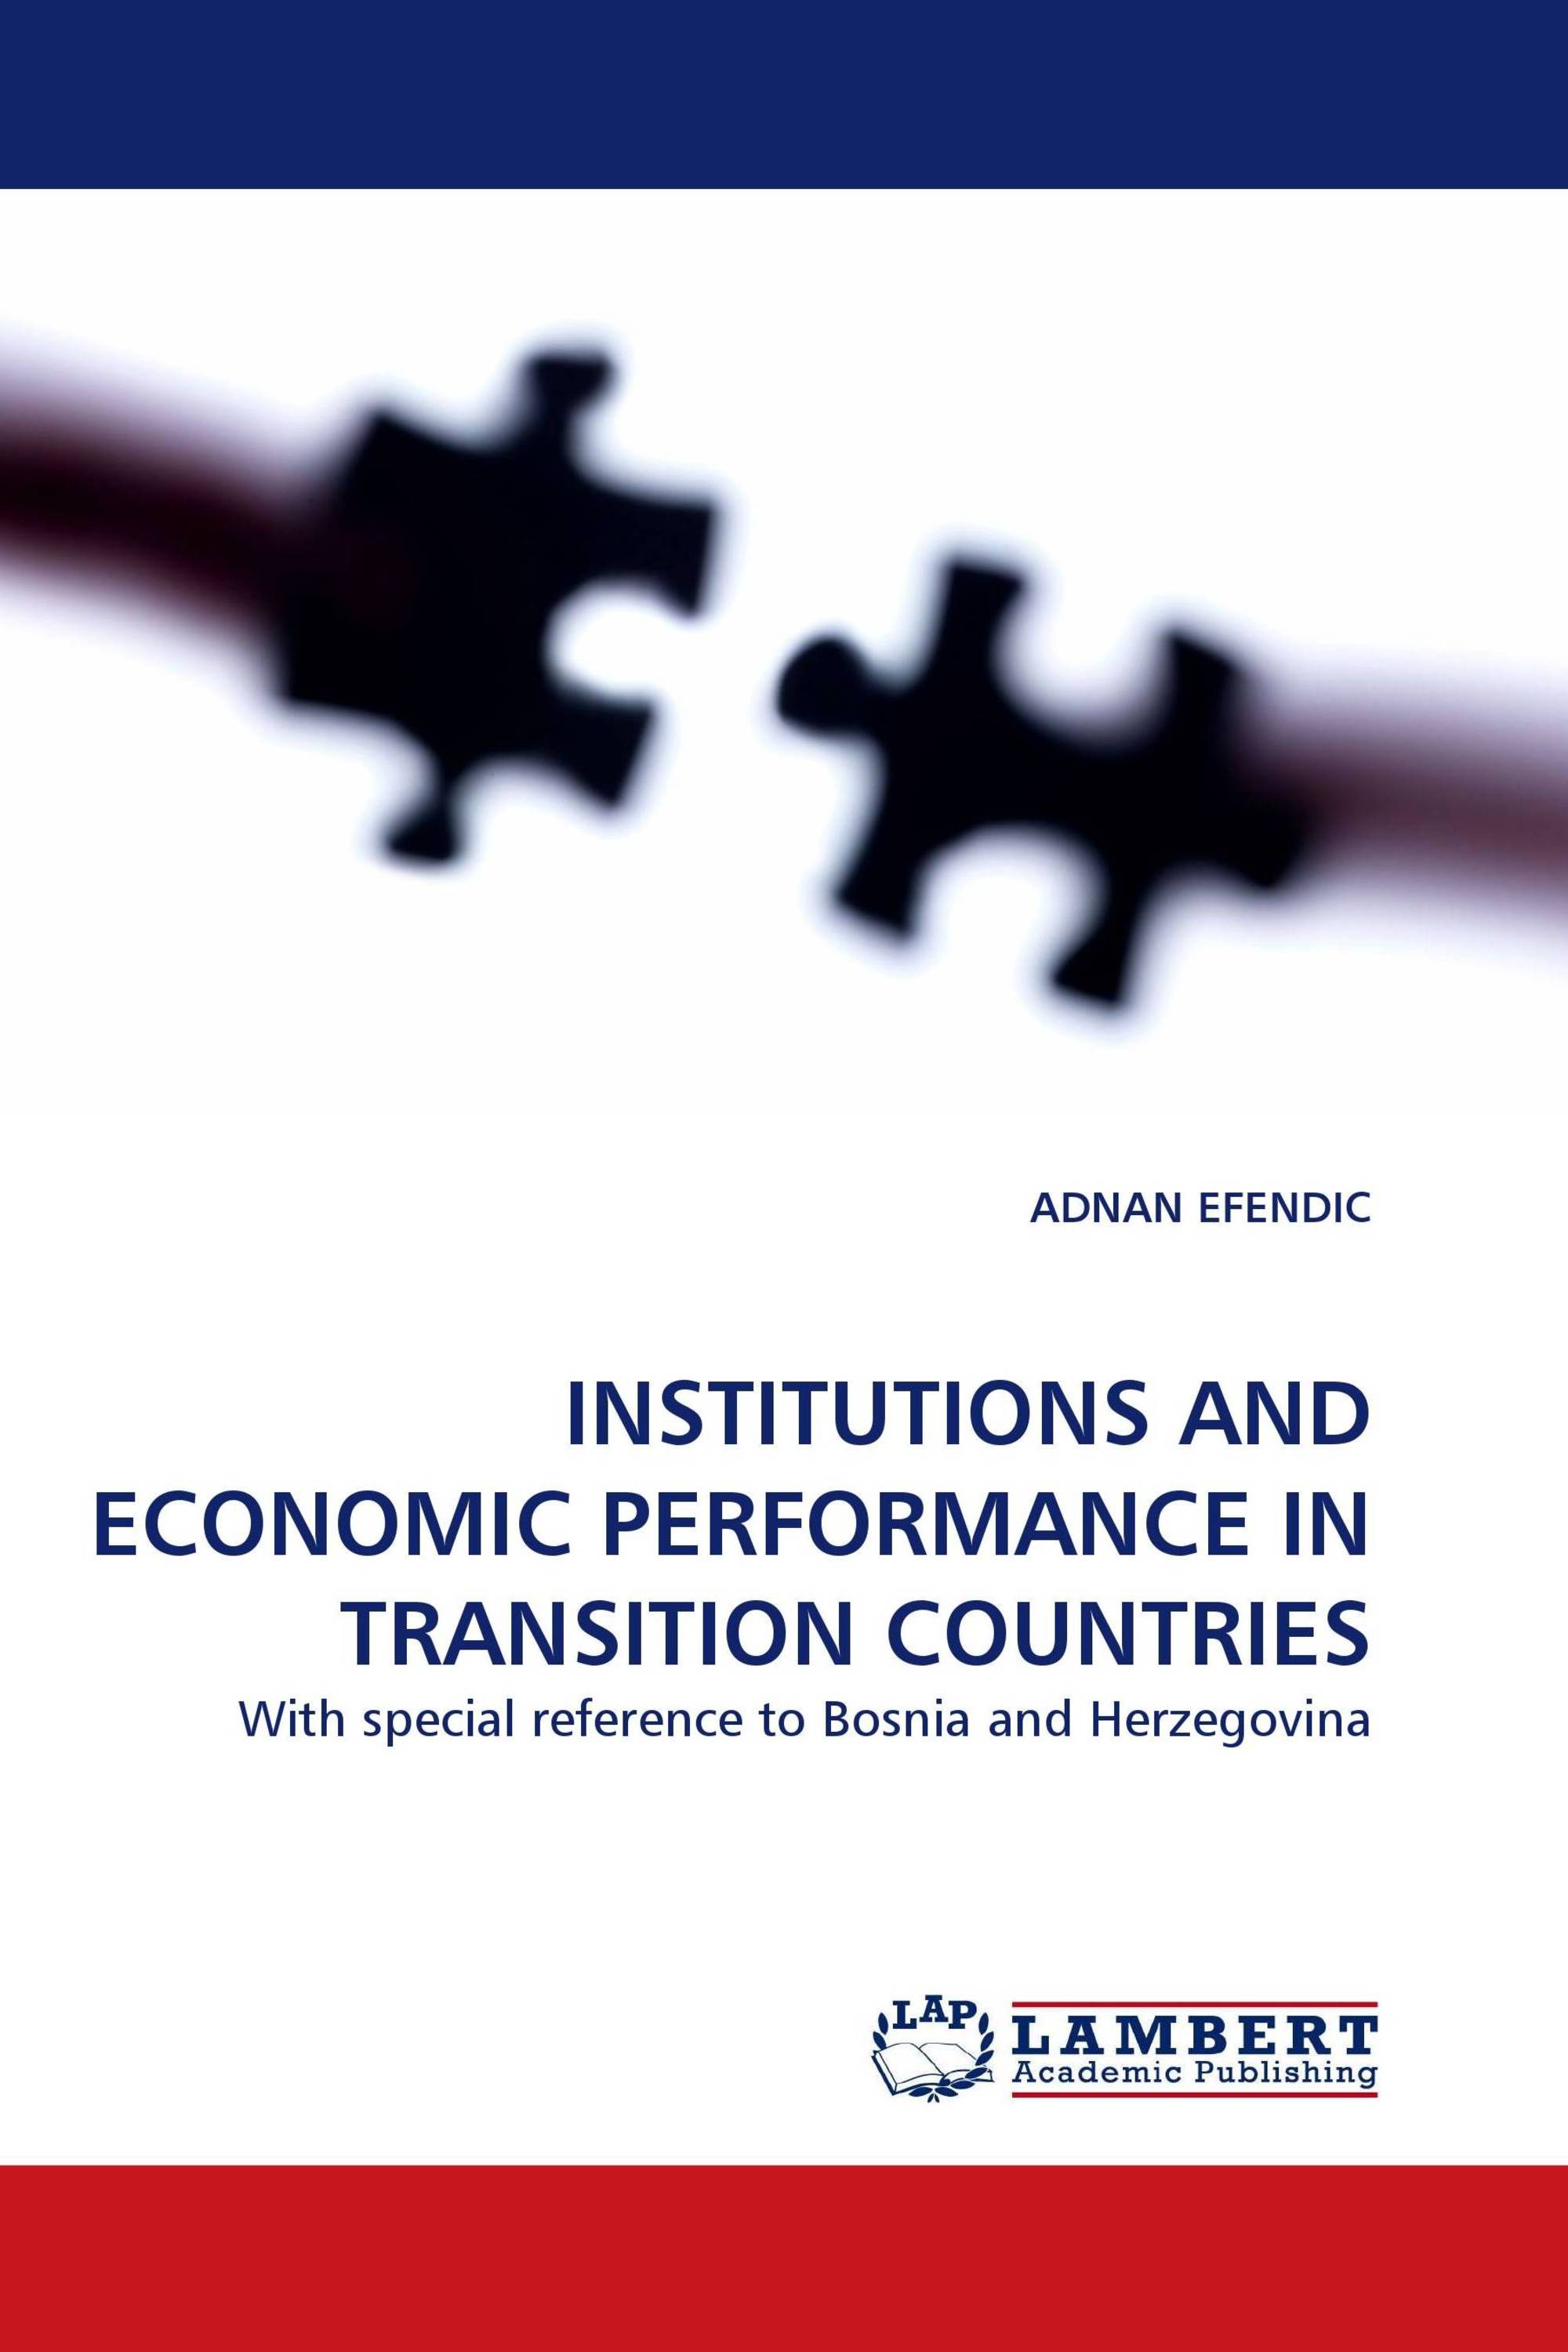 INSTITUTIONS AND ECONOMIC PERFORMANCE IN TRANSITION COUNTRIES